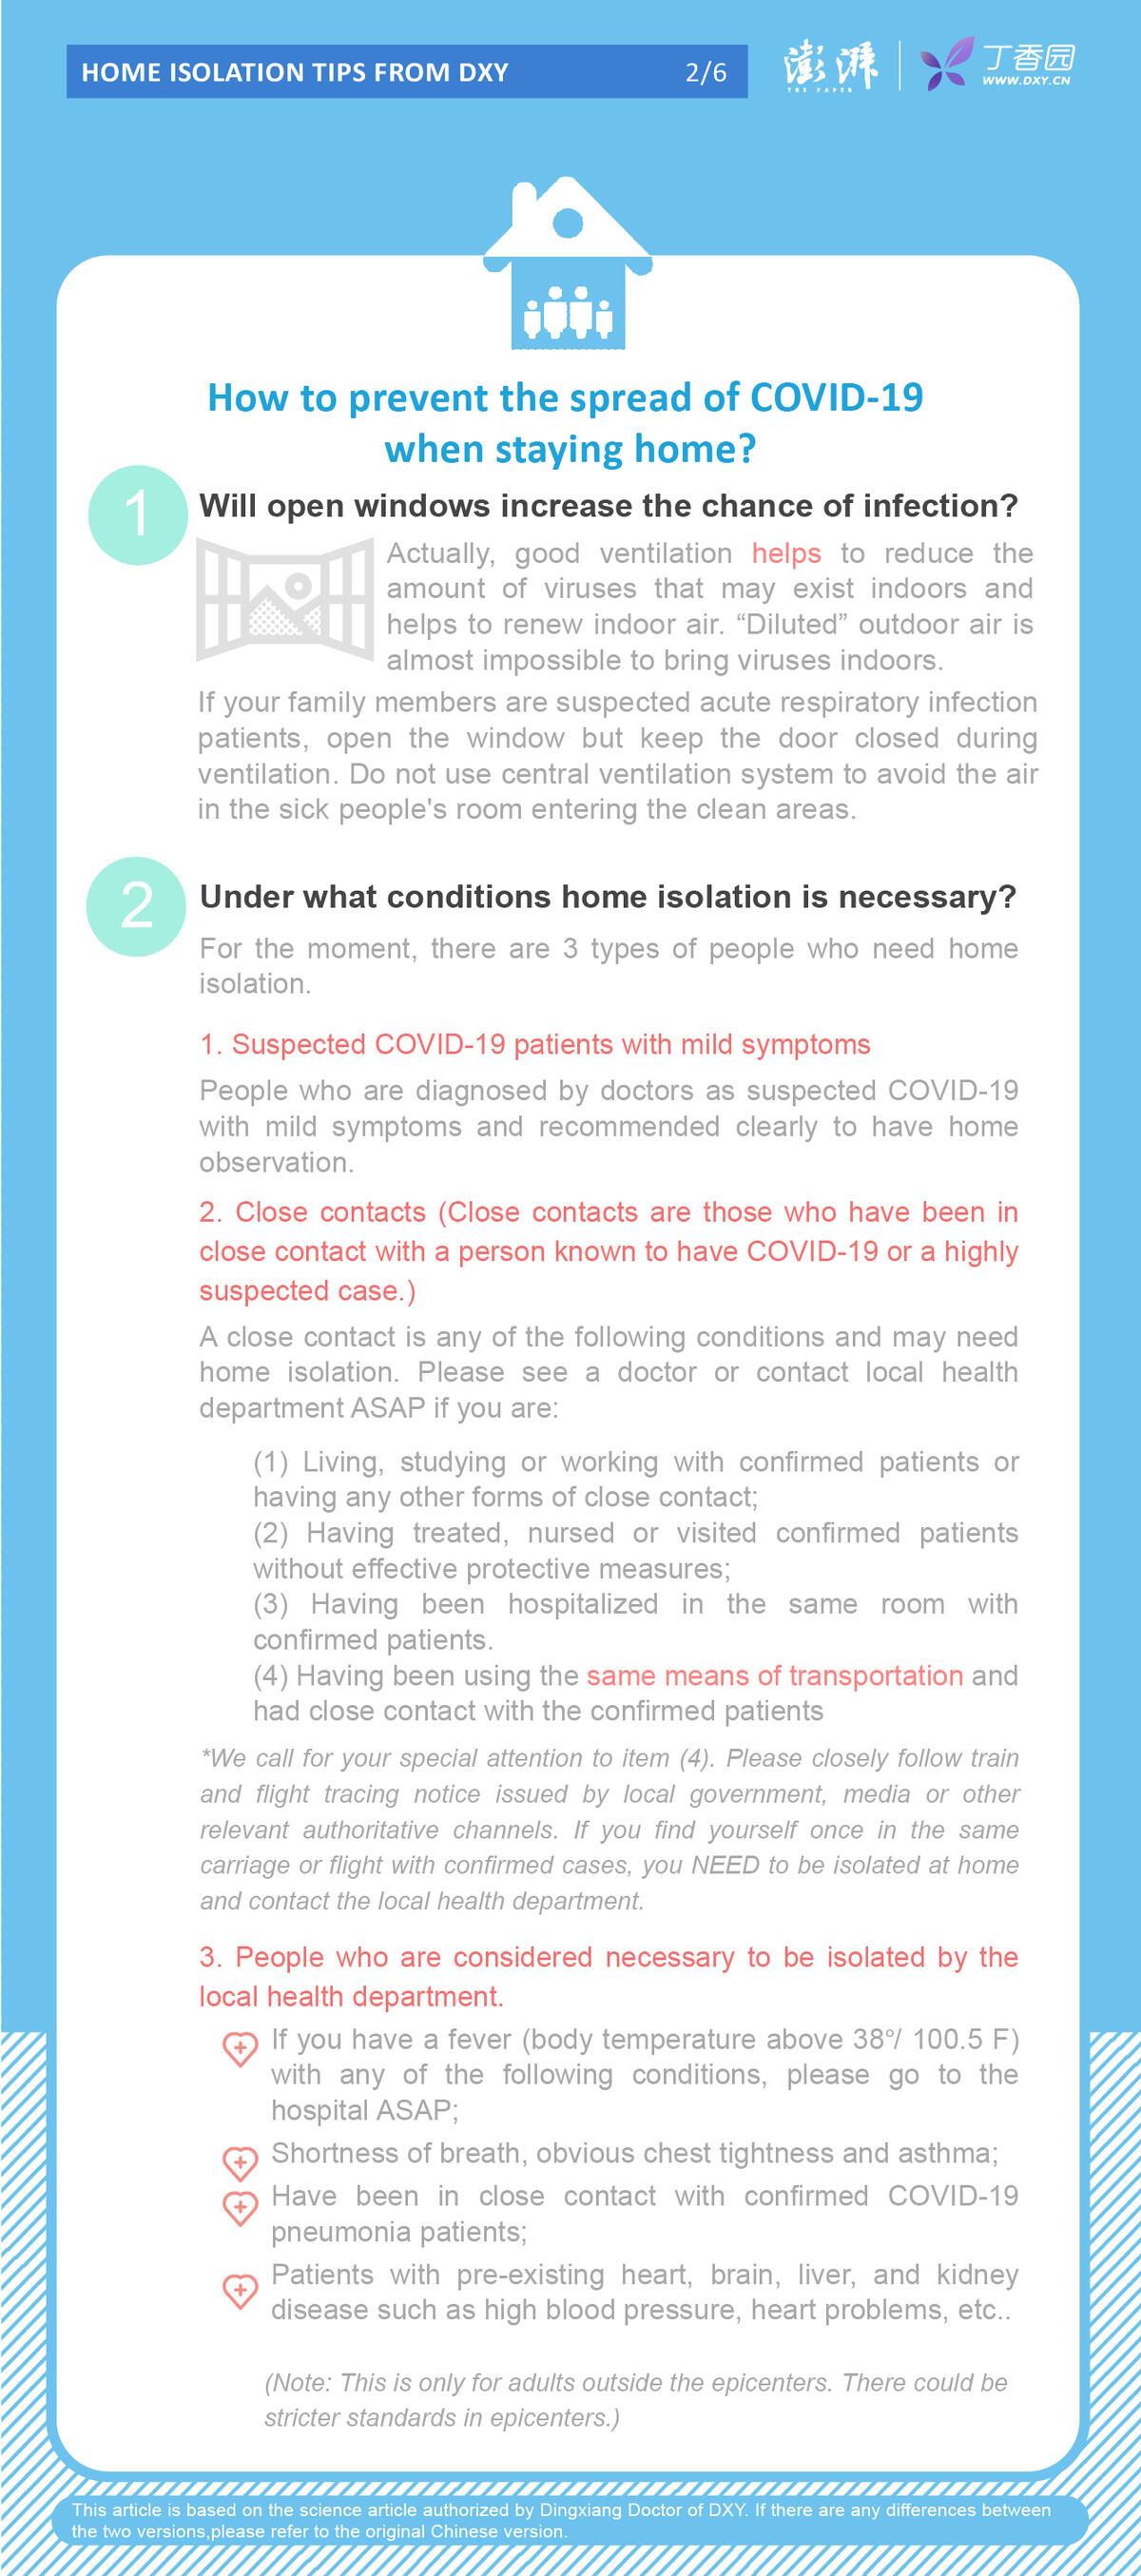 How to prevent the spread of COVID-19 when staying home?